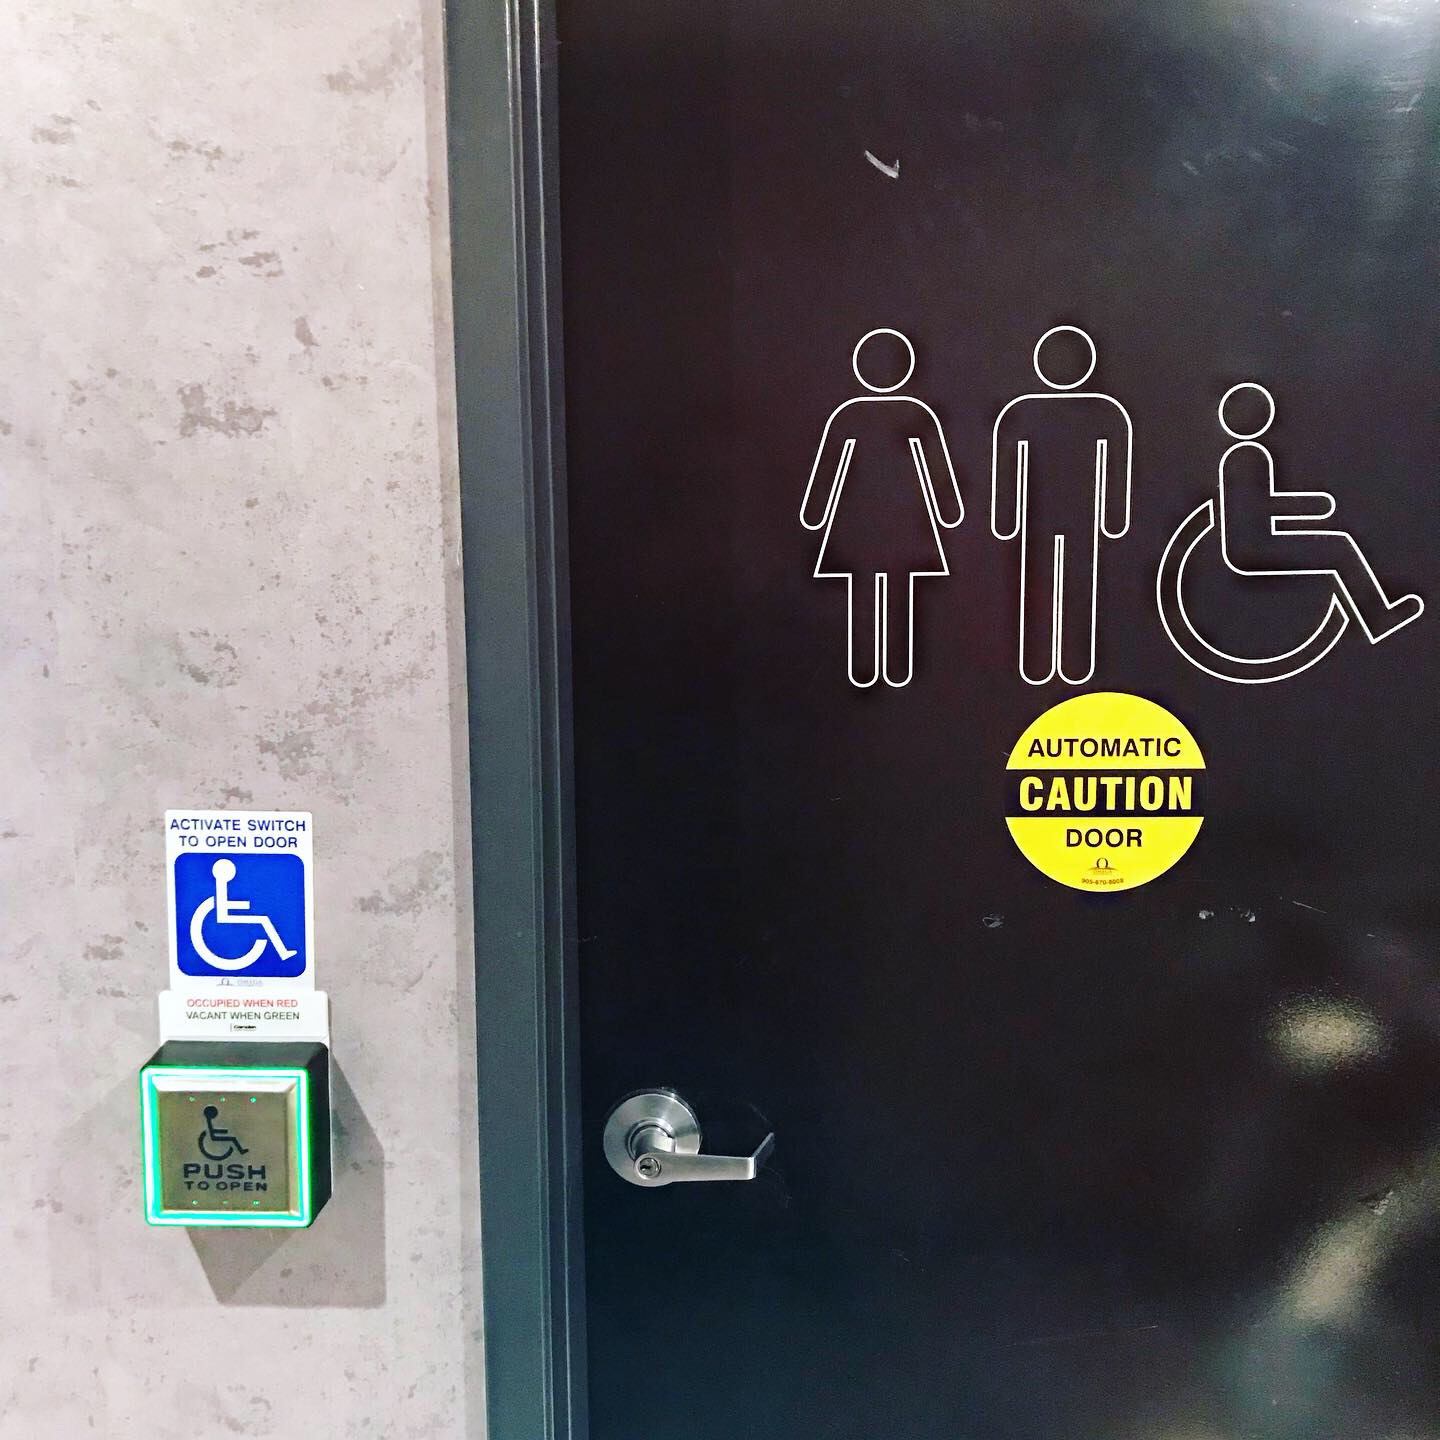 An accessible washroom door. On the left is an automatic door button that is lit green because the washroom is vacant.